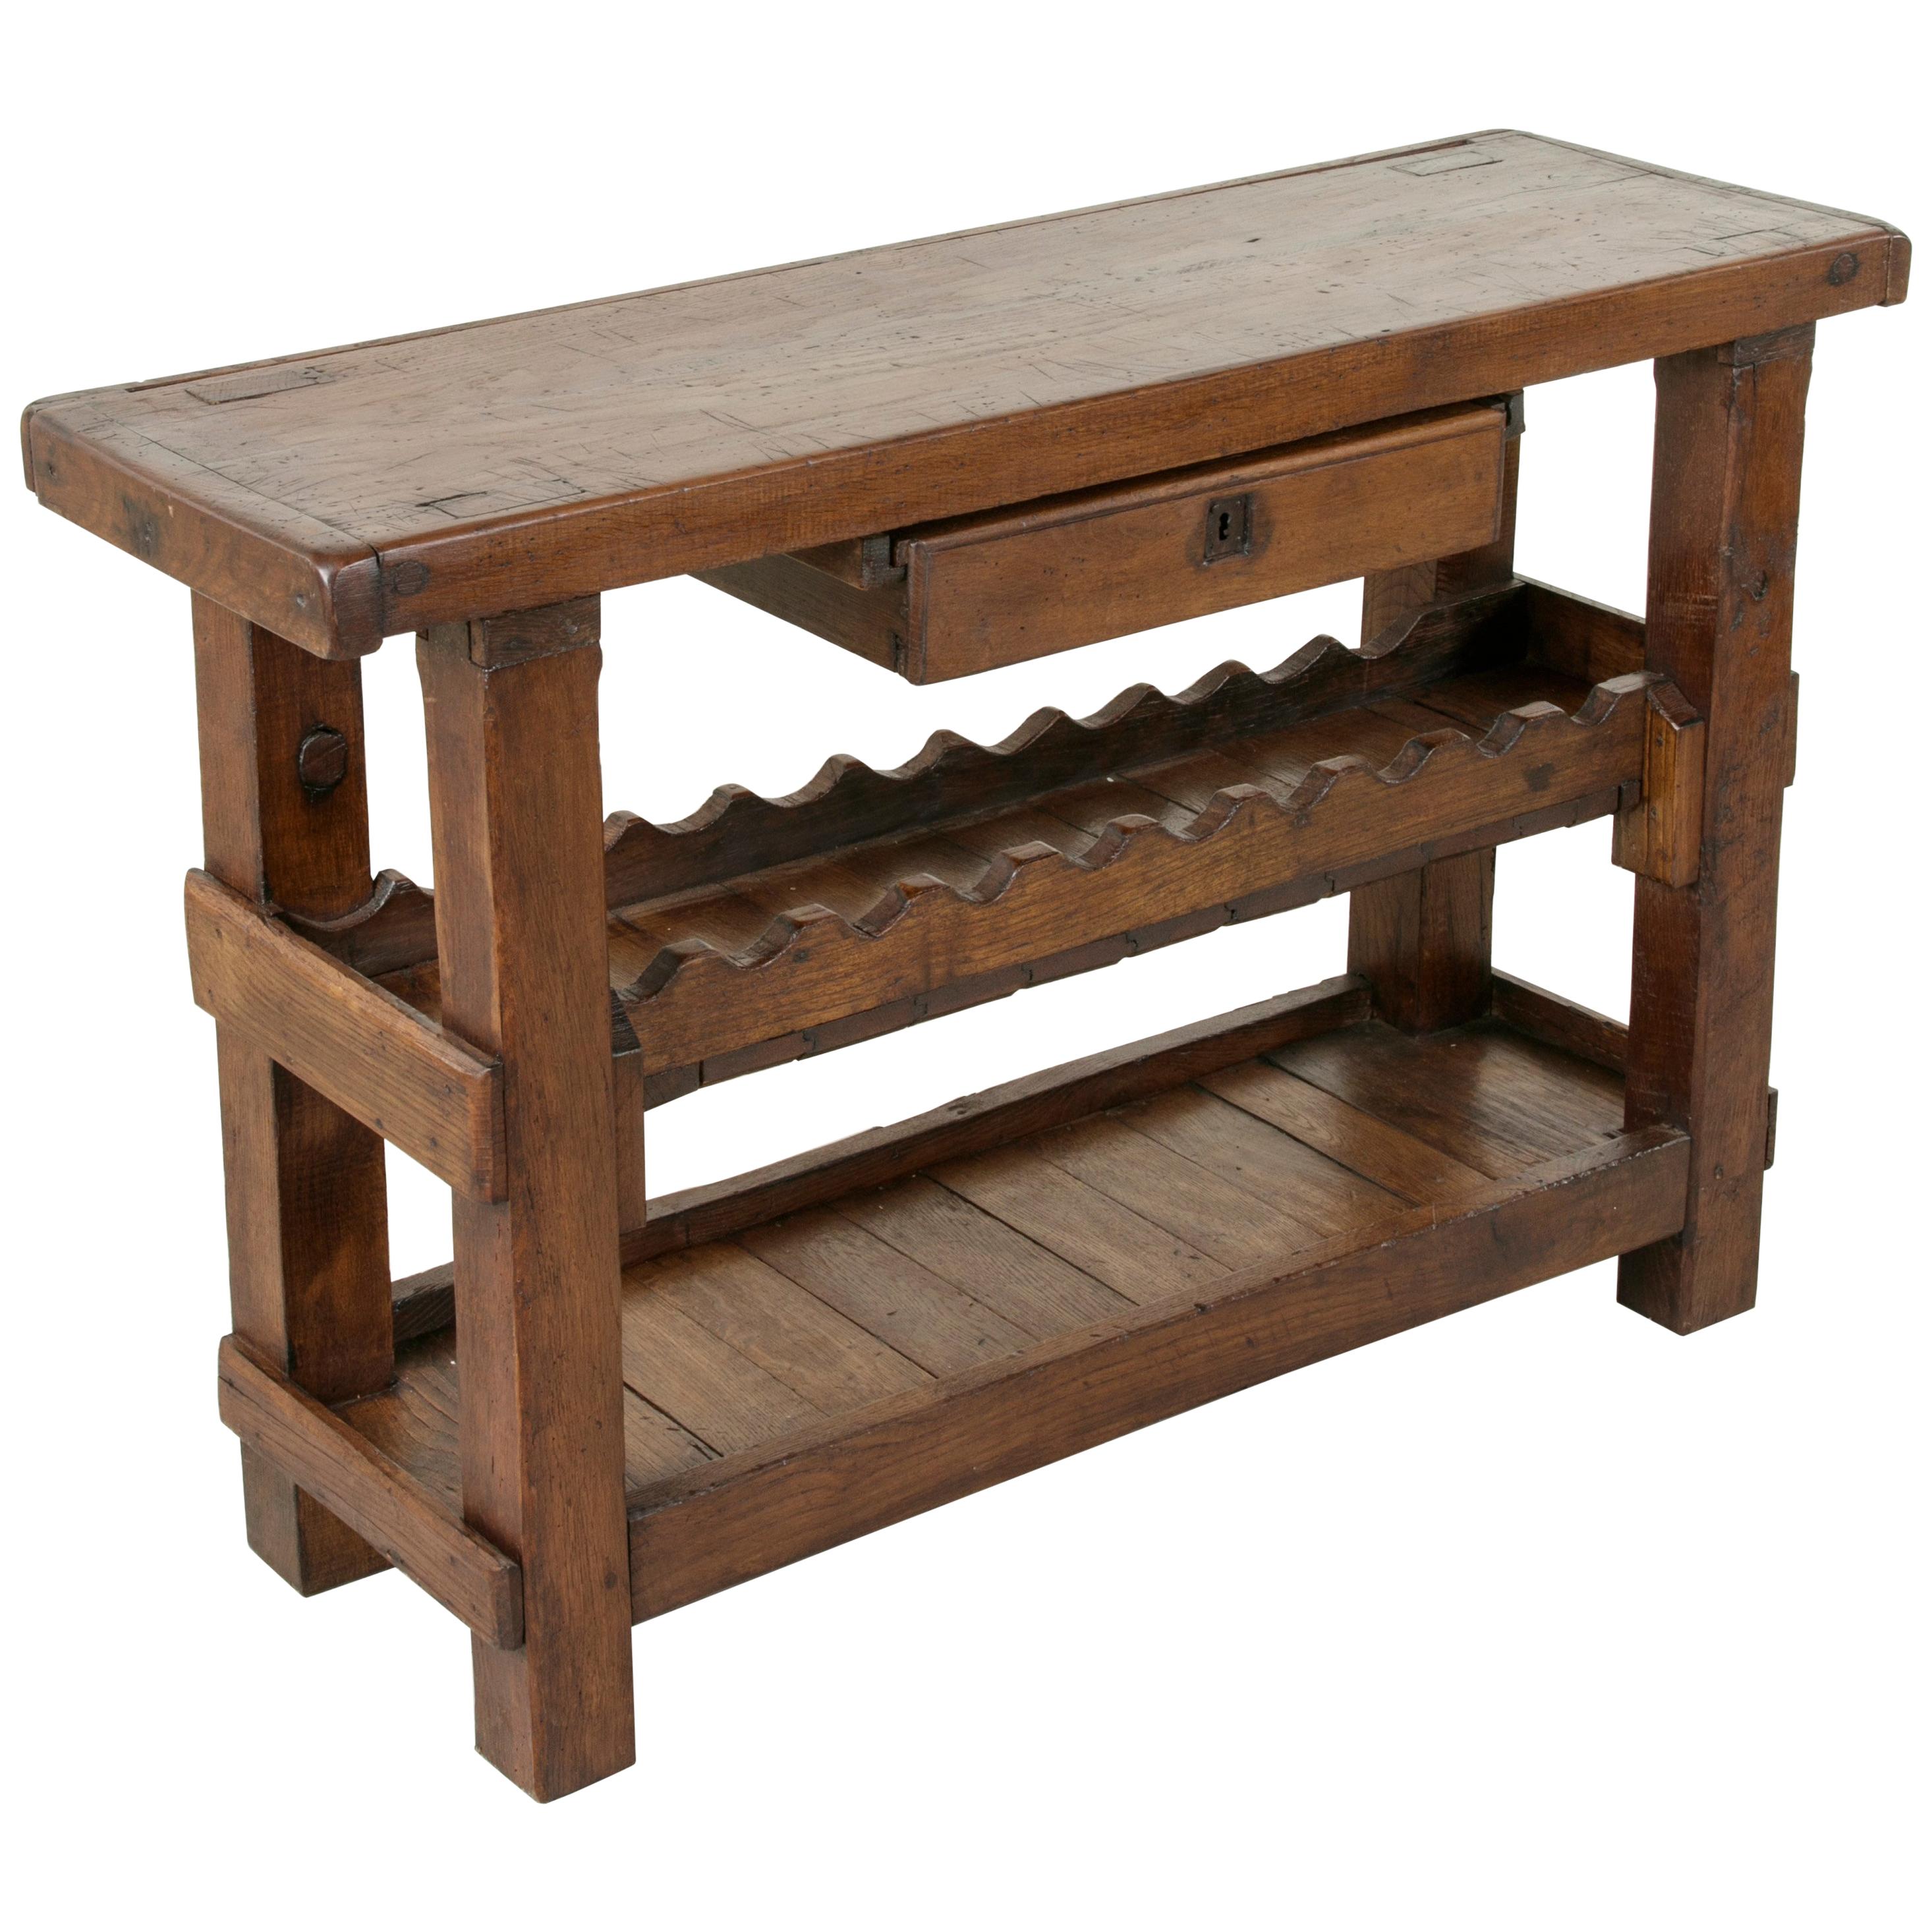 Early 20th Century French Oak Workbench, Console, or Sofa Table with Wine Rack